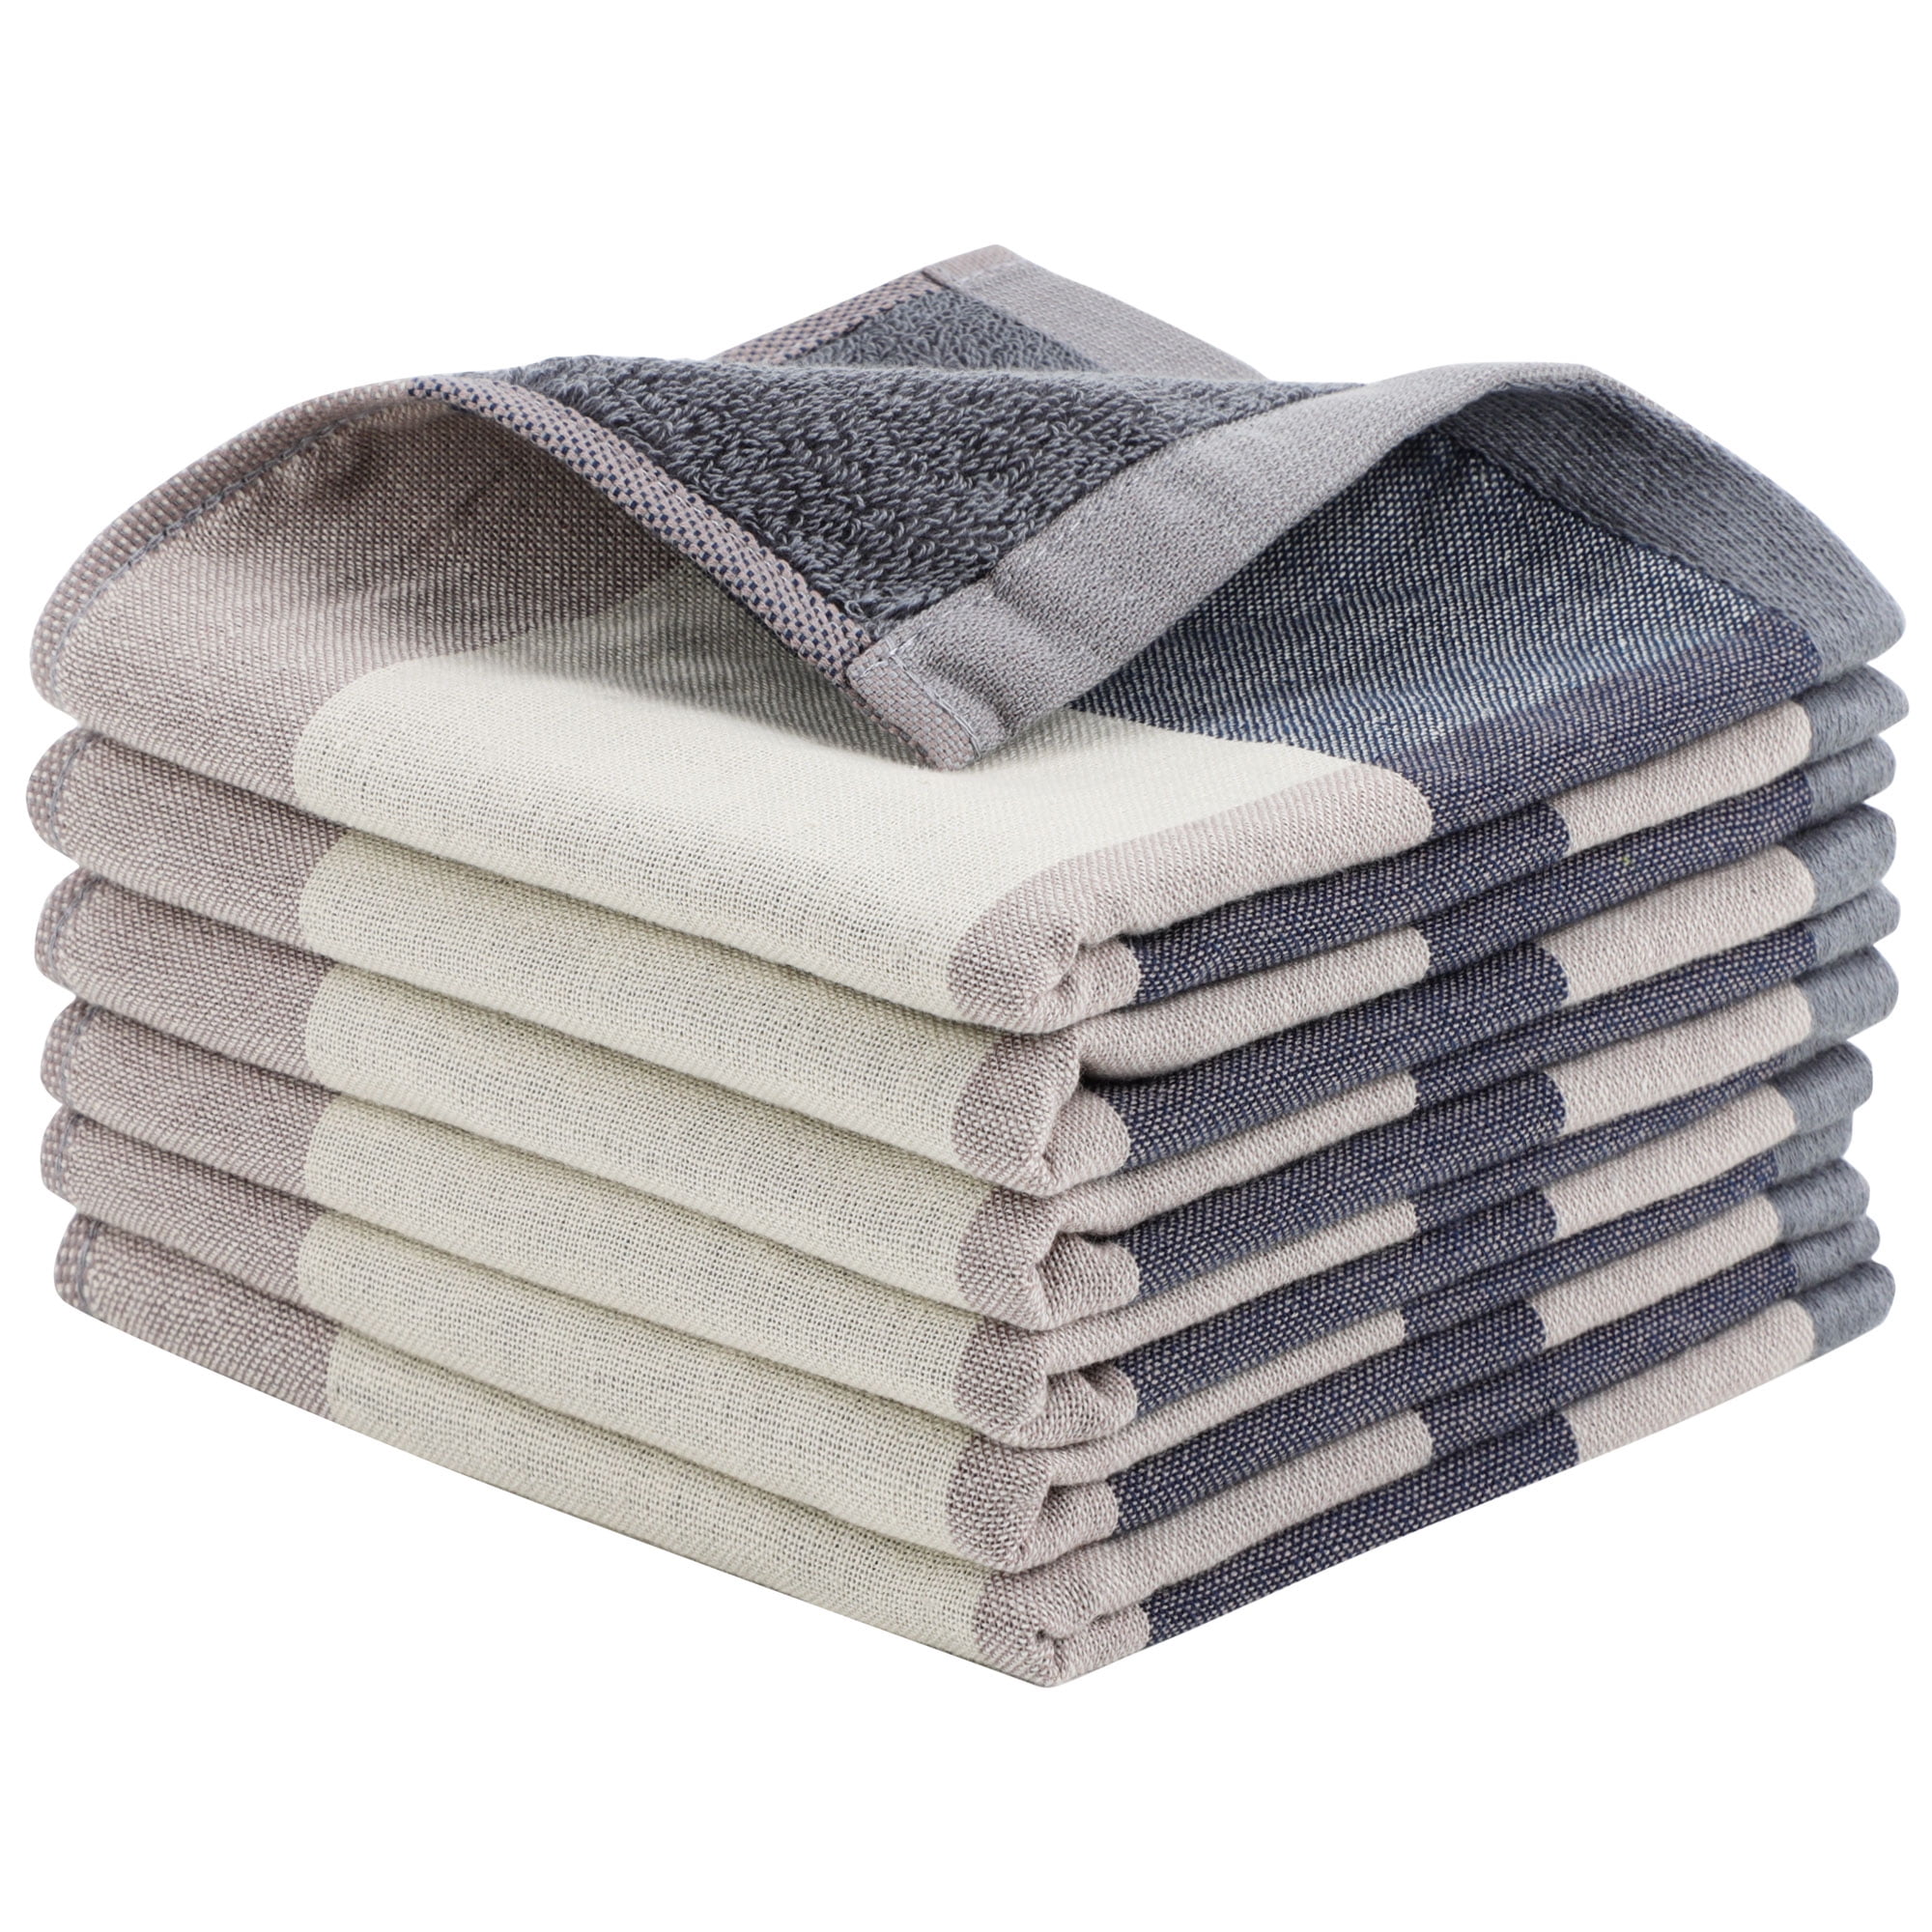 Unique Bargains Cotton Thick and Absorbent Kitchen Towels 13 x 13 Inches 6 Pcs Blue Gray